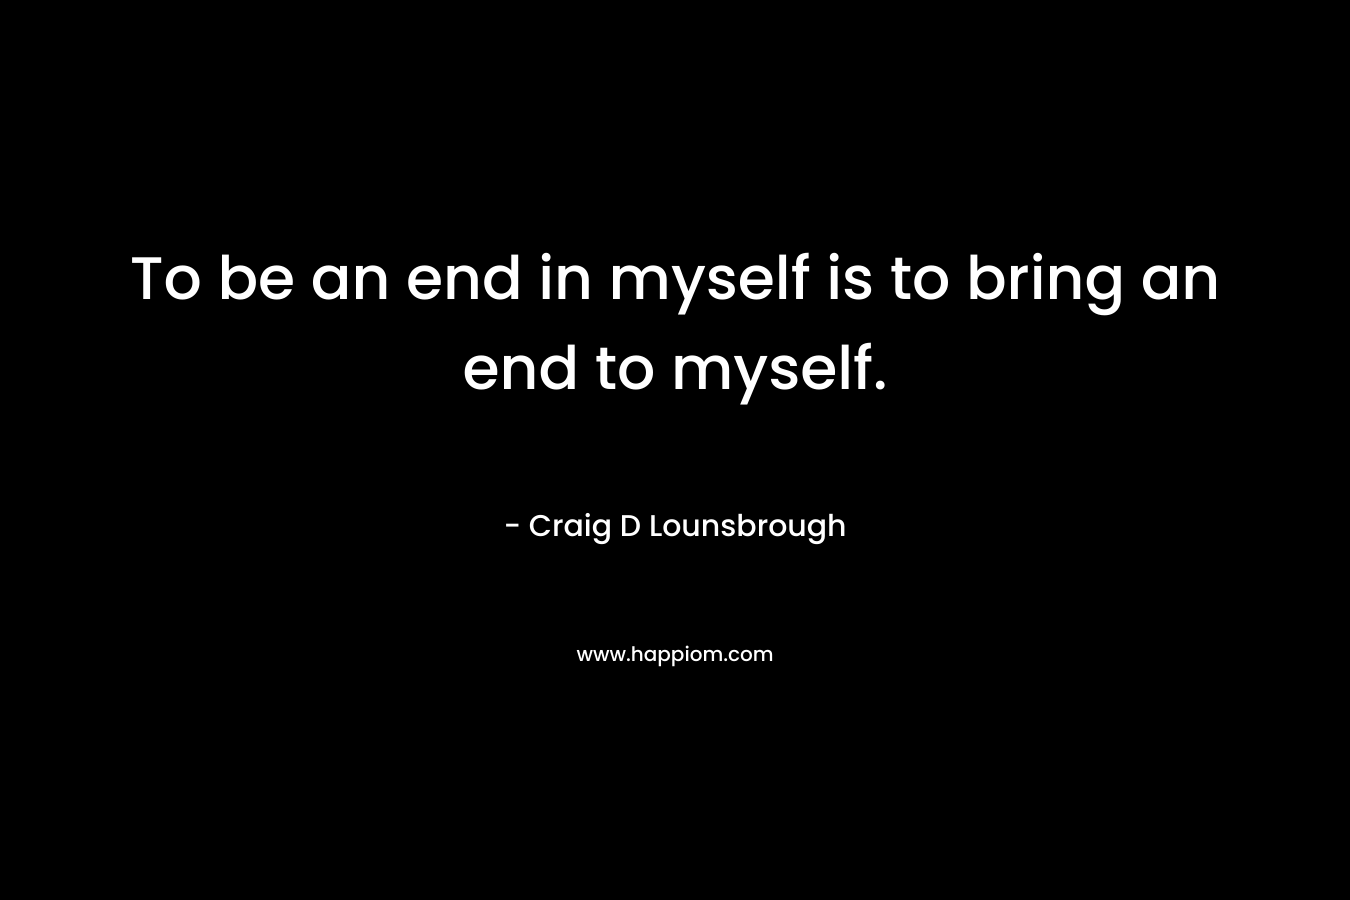 To be an end in myself is to bring an end to myself.